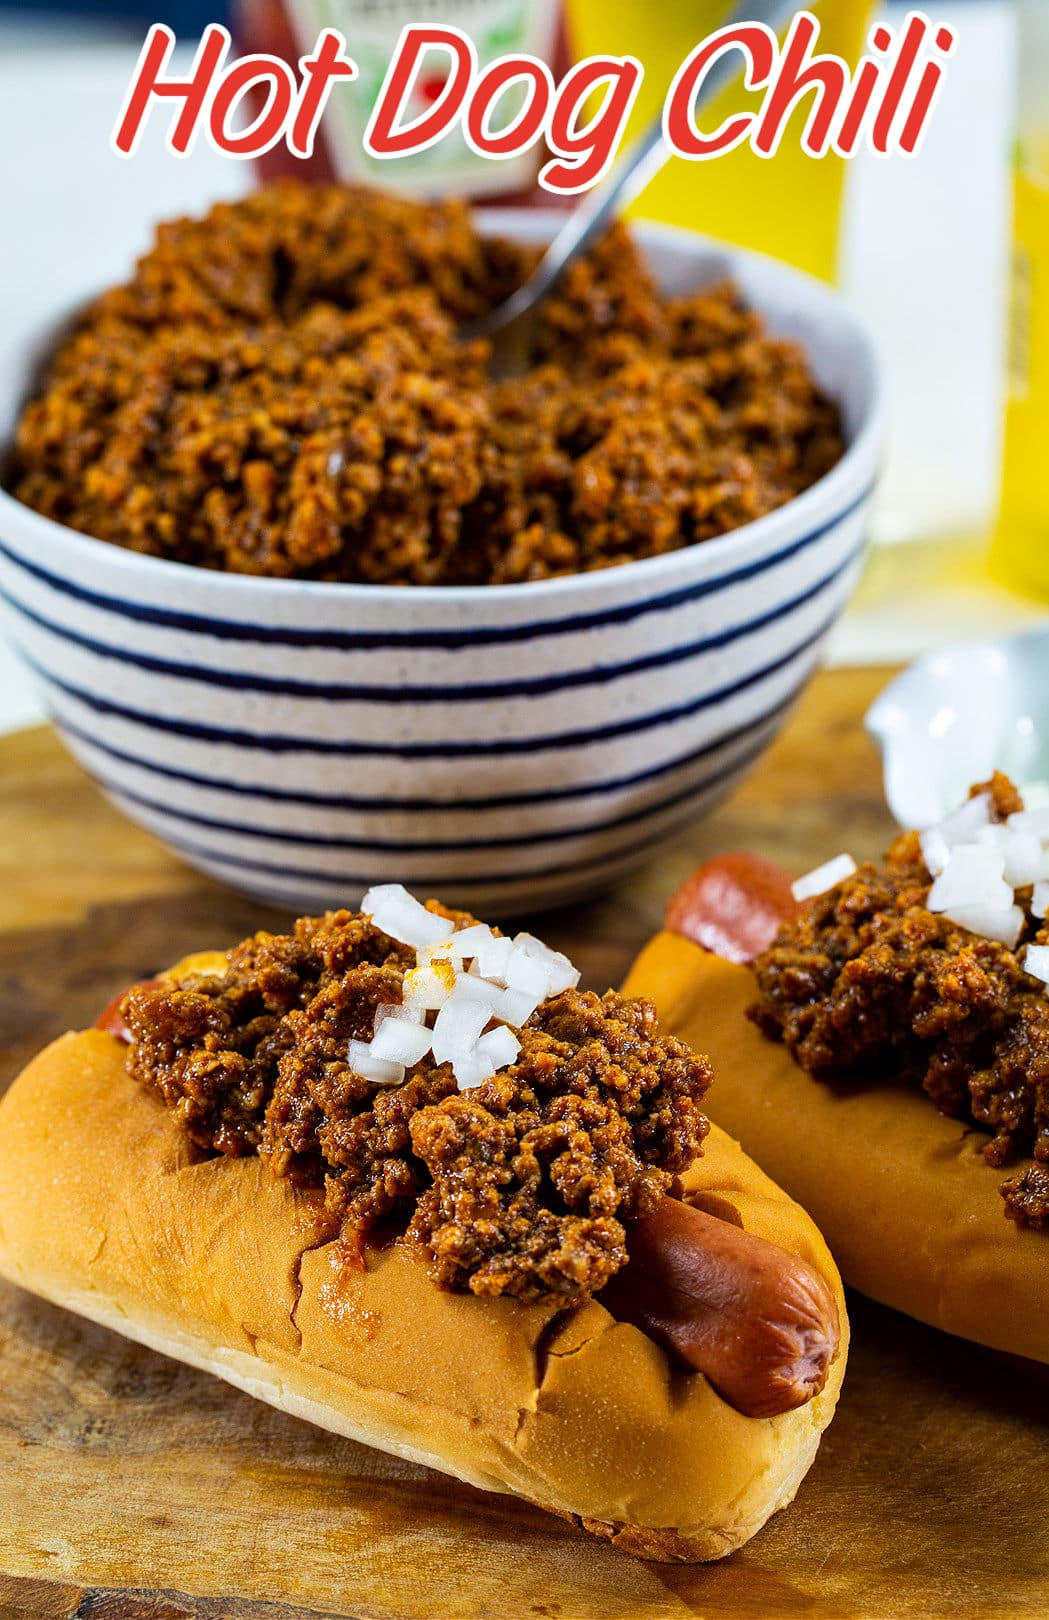 Hot Dogs topped with Hot Dog Chili.